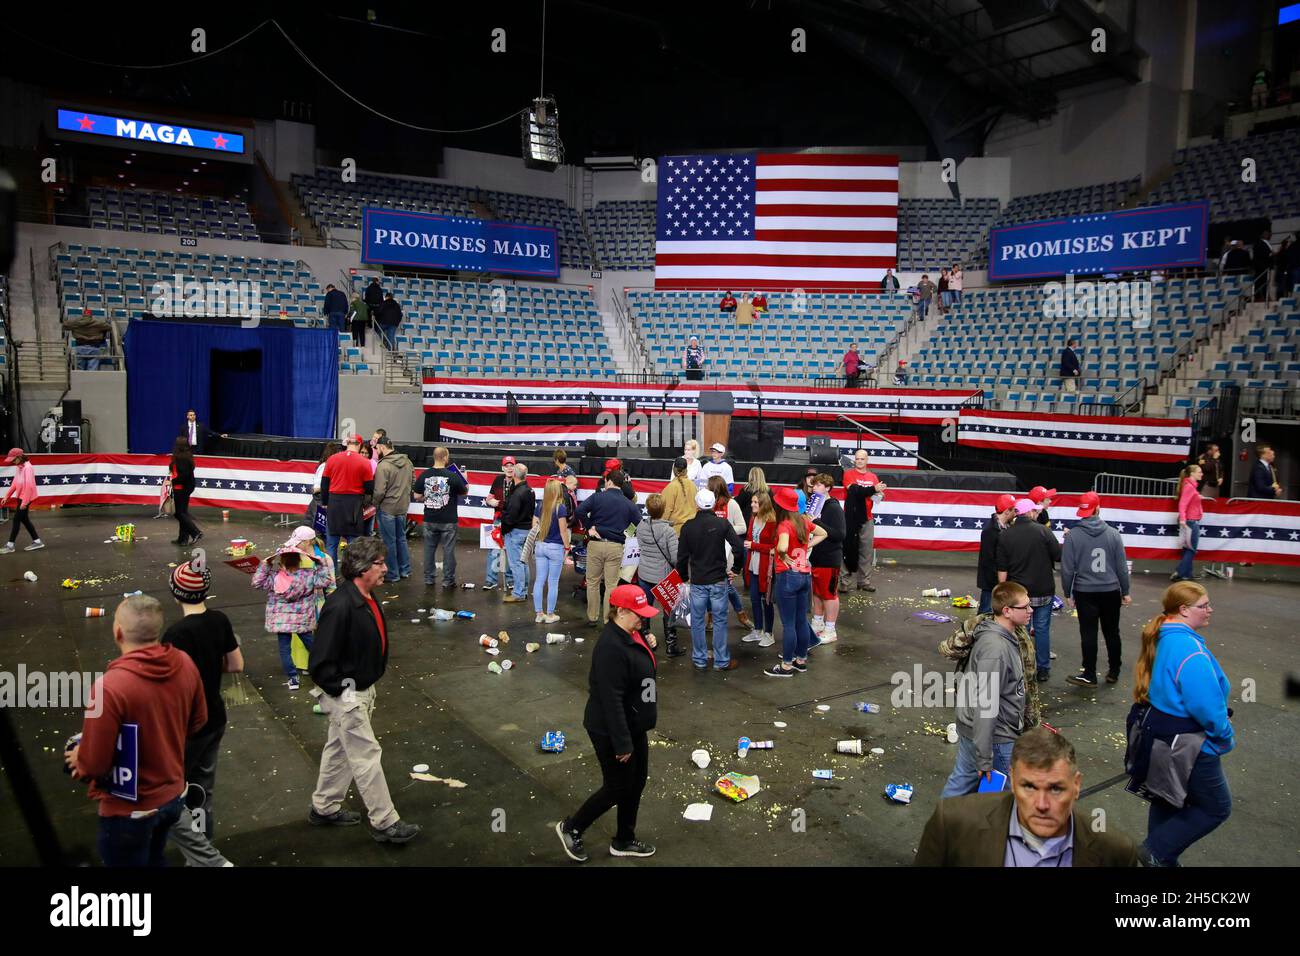 11052018 - Fort Wayne, Indiana, USA: Popcorn and garbage litters the floor after United States President Donald J. Trump campaigned for Indiana congressional candidates during a Make America Great Again! rally at the Allen County War Memorial Coliseum in Fort Wayne, Indiana. Stock Photo